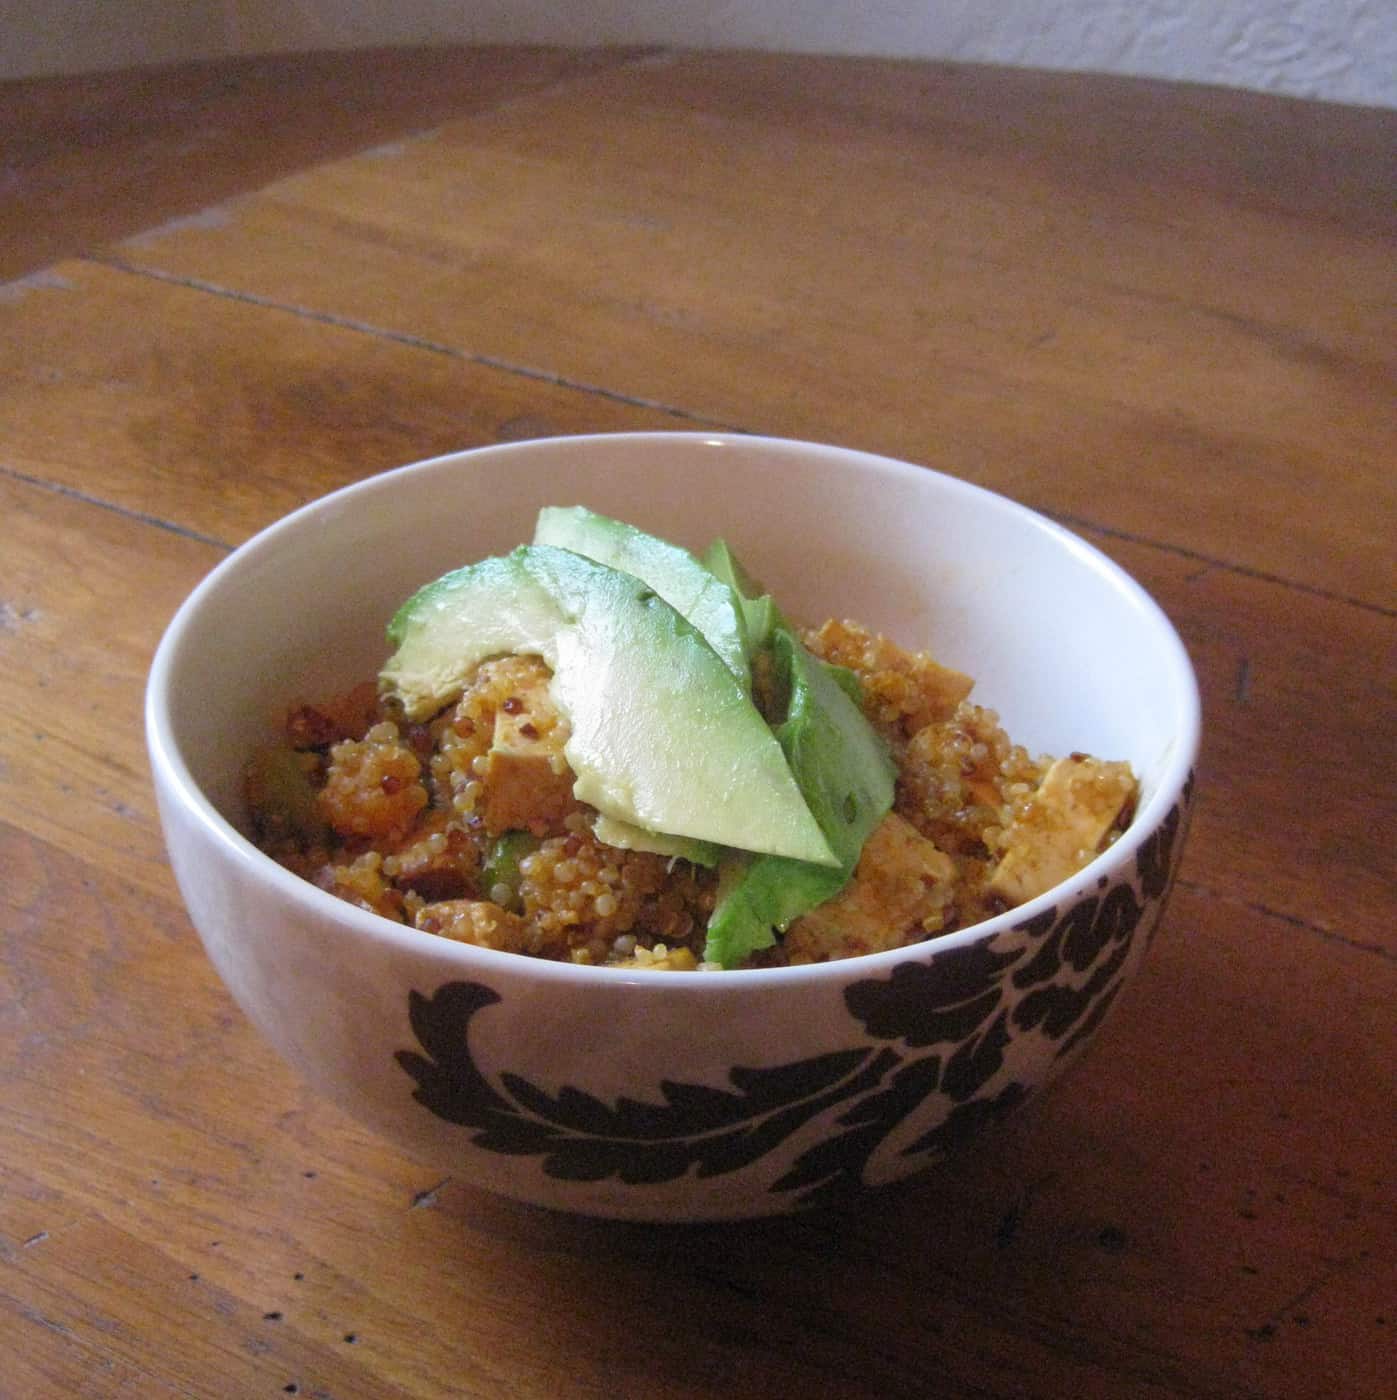 bowl with vegetarian tofu, quinoa, and avocado slices on table